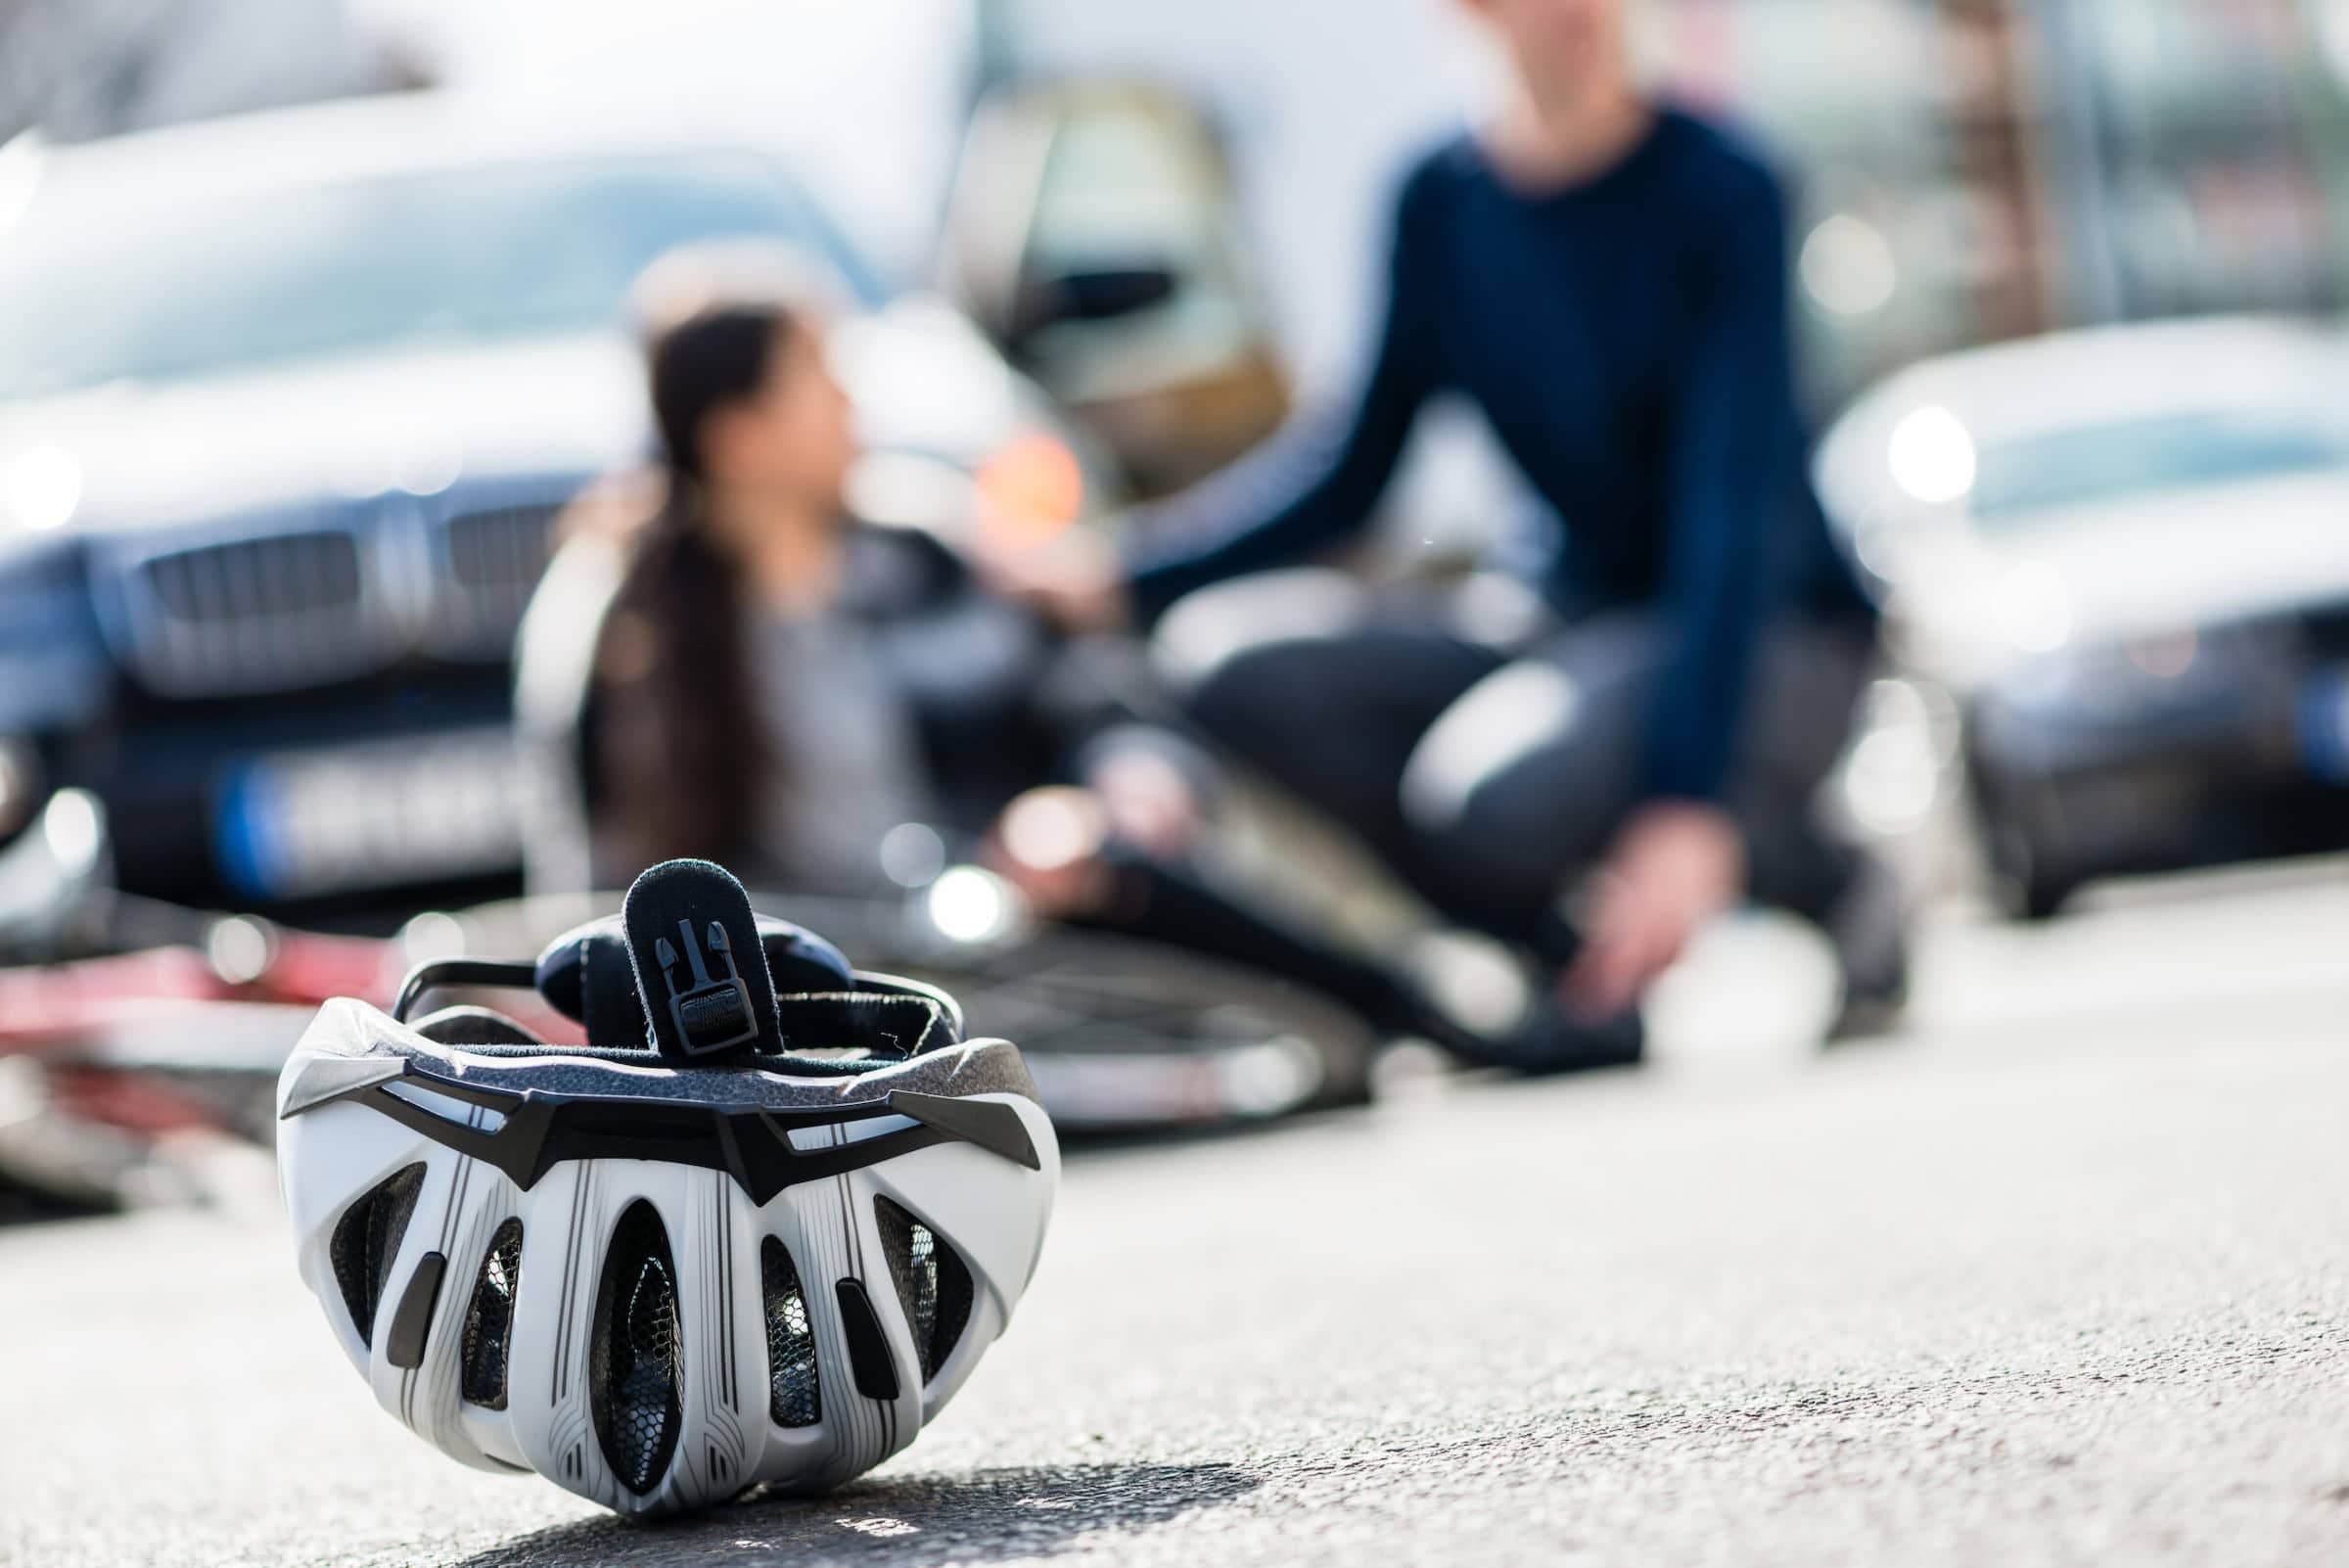 What to do after a cycling accident